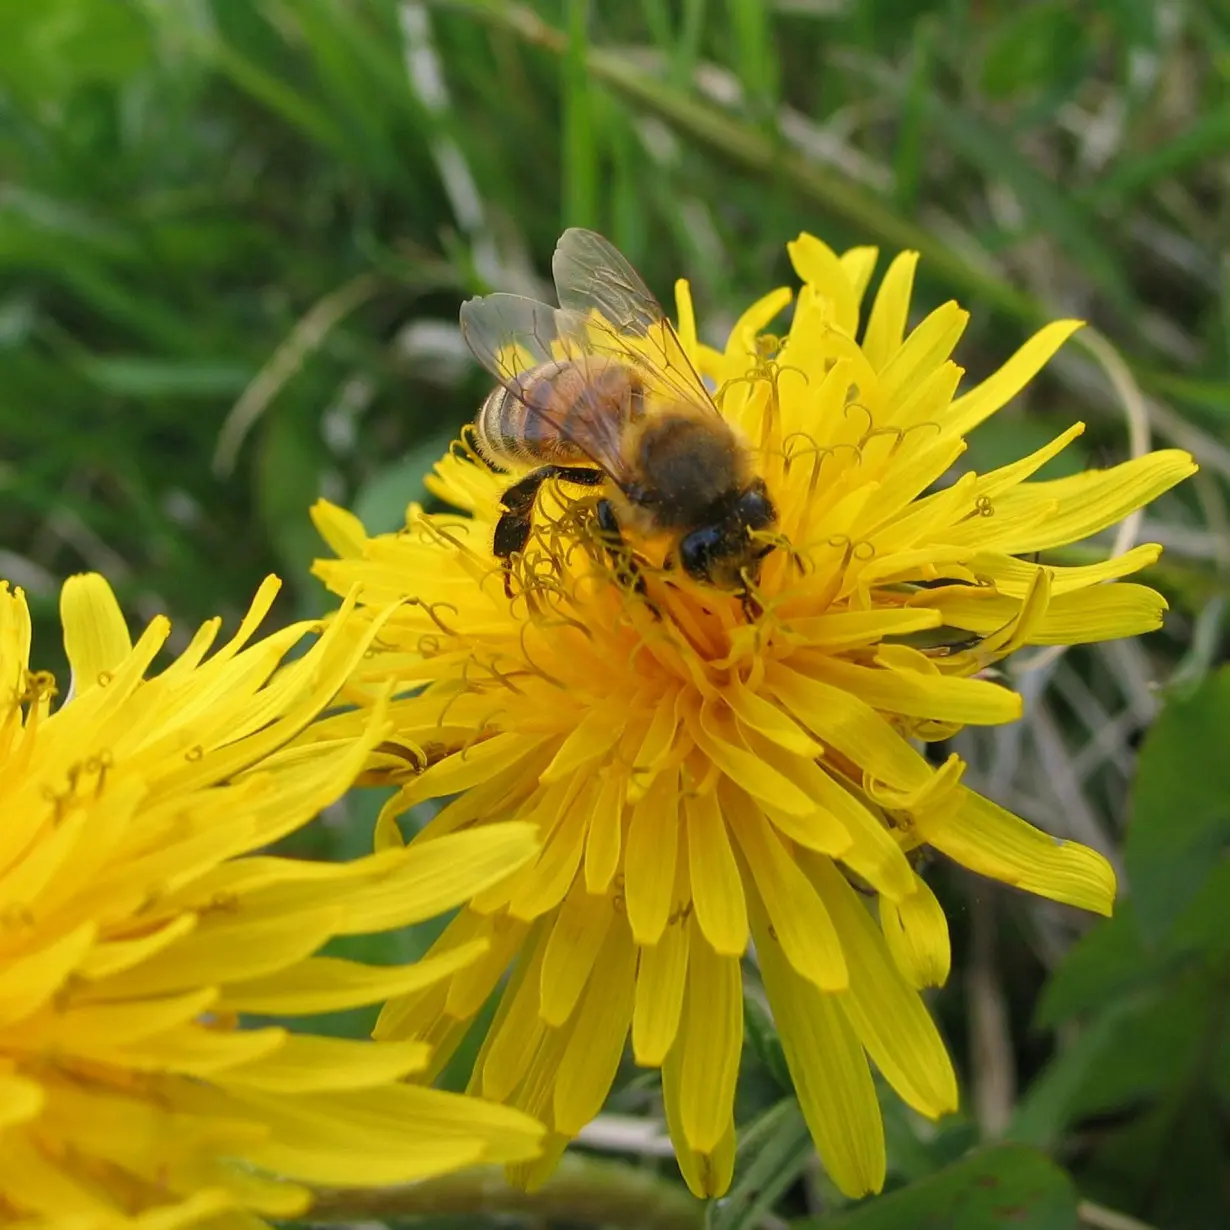 It’s OK to mow in May − the best way to help pollinators is by adding native plants